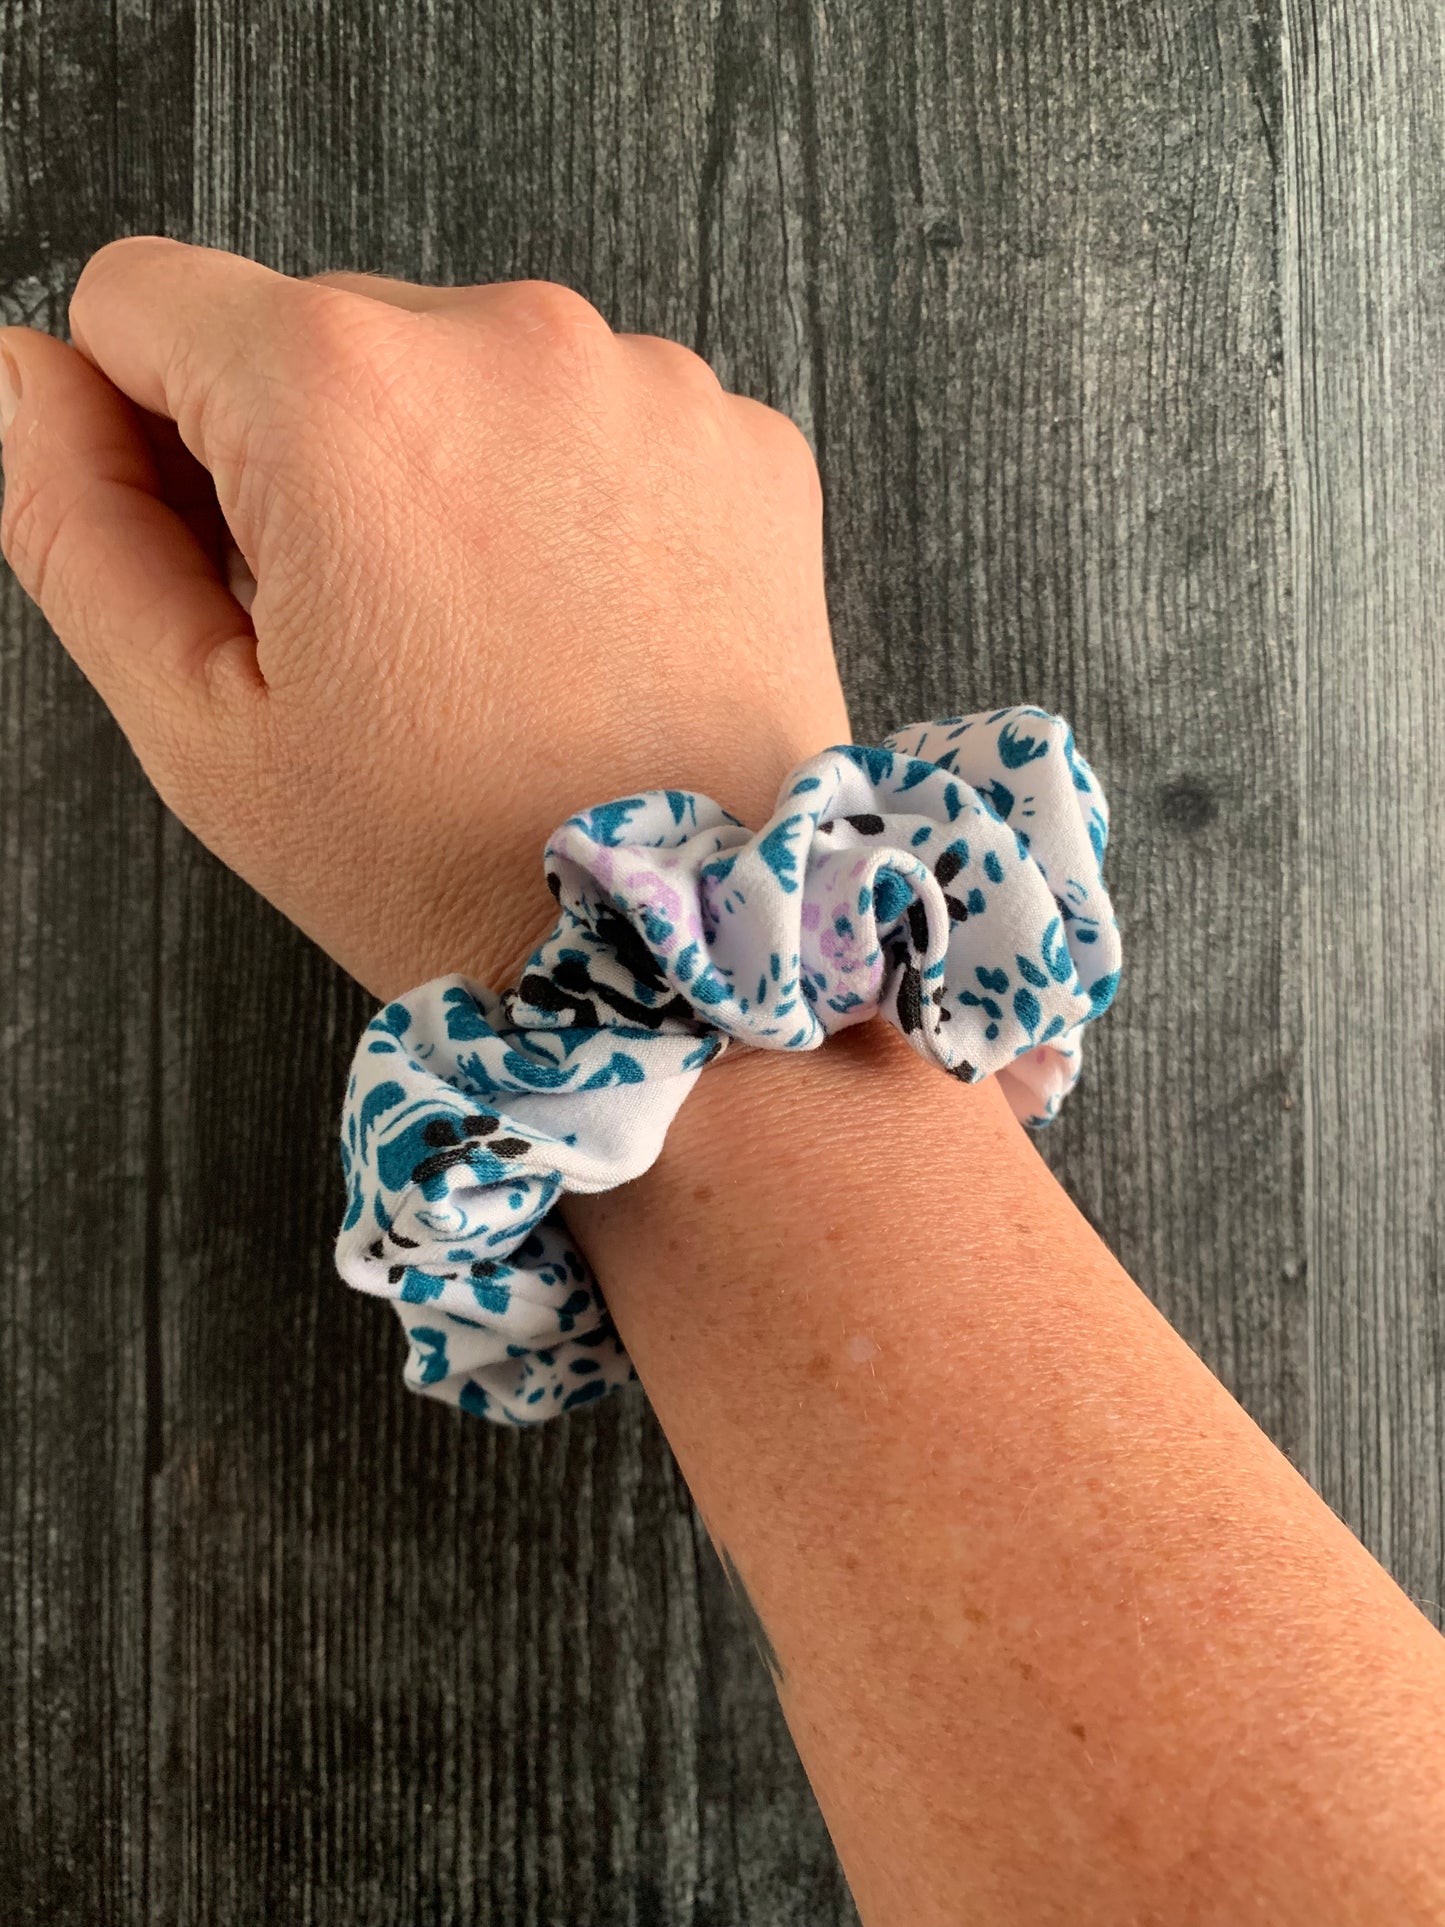 Lilac, Teal, and Black Flowers on White - Knit Scrunchie